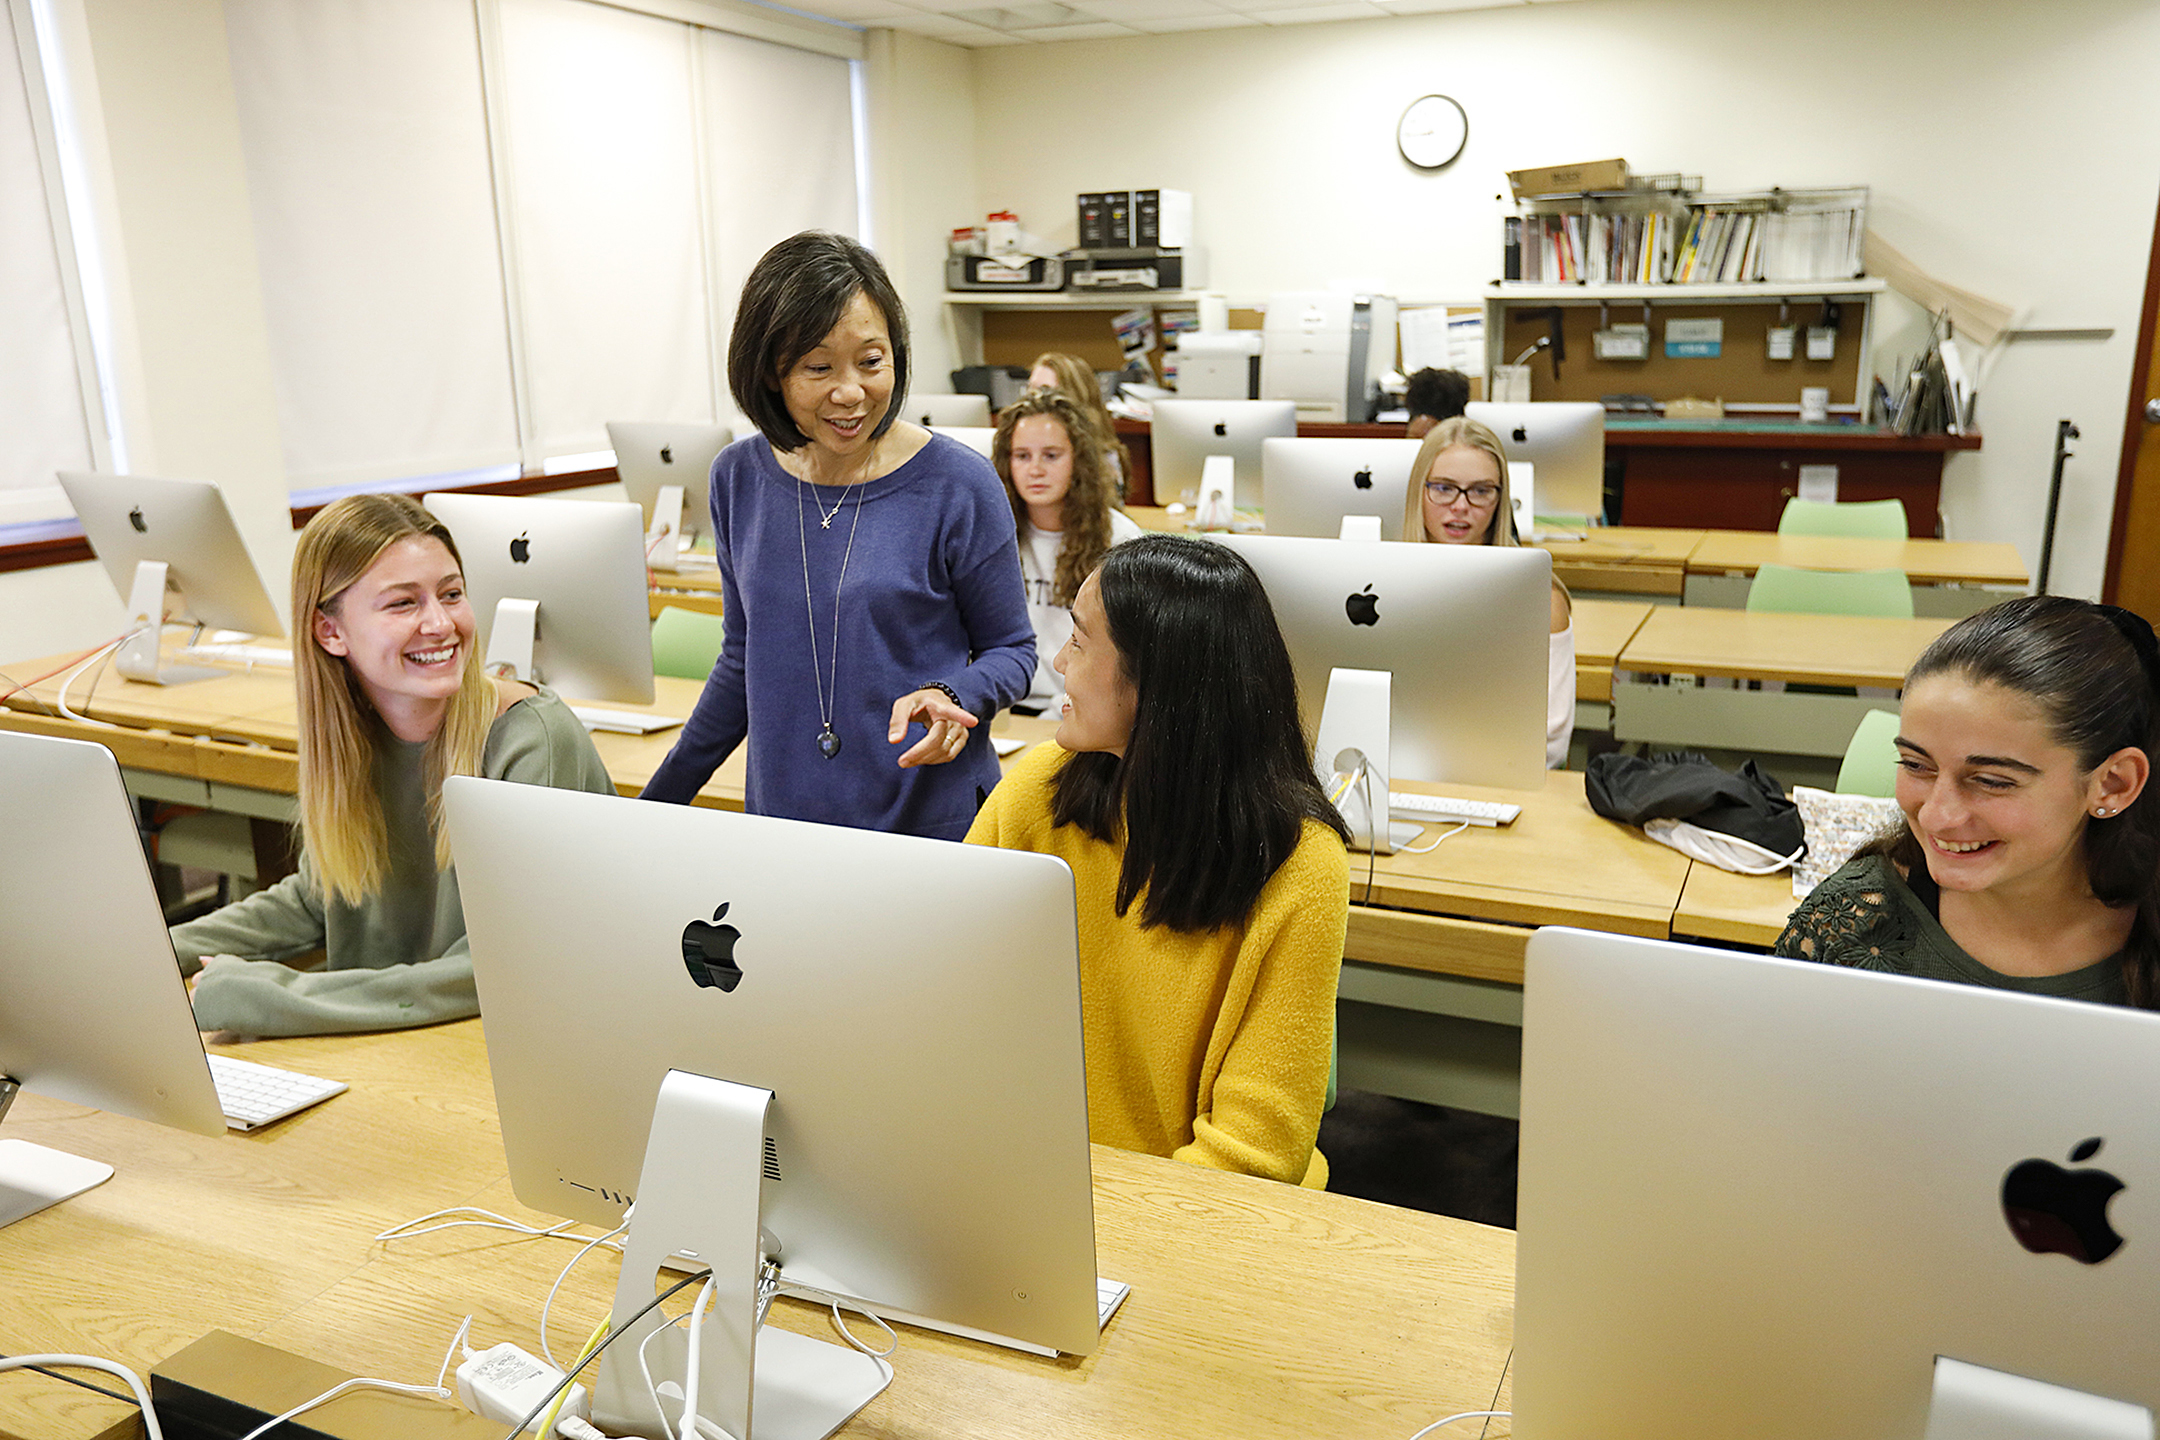 Female students and their professor working on computers.